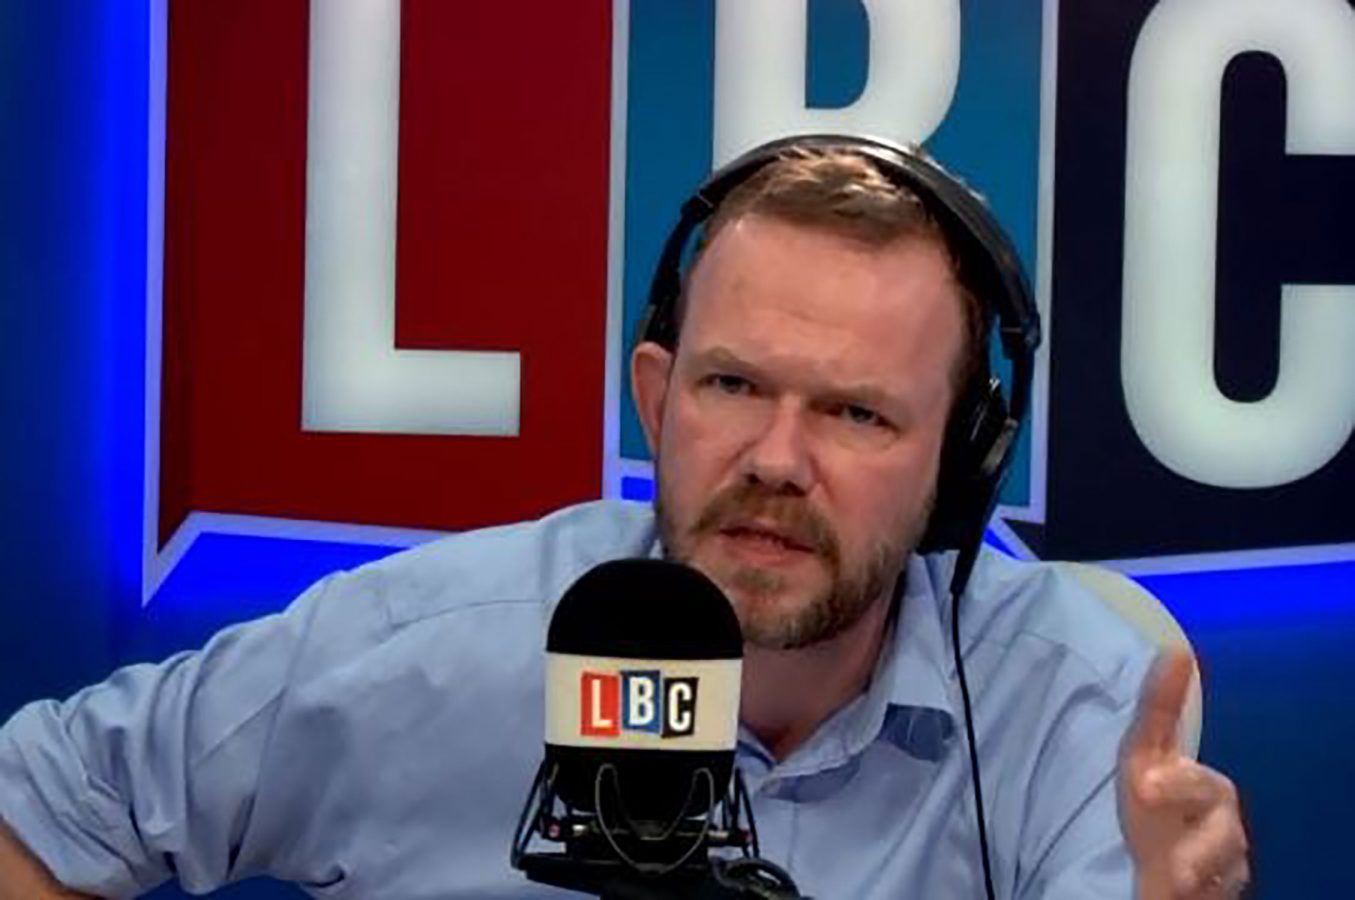 James O’Brien’s Germany+ Brexit proposals get viral support